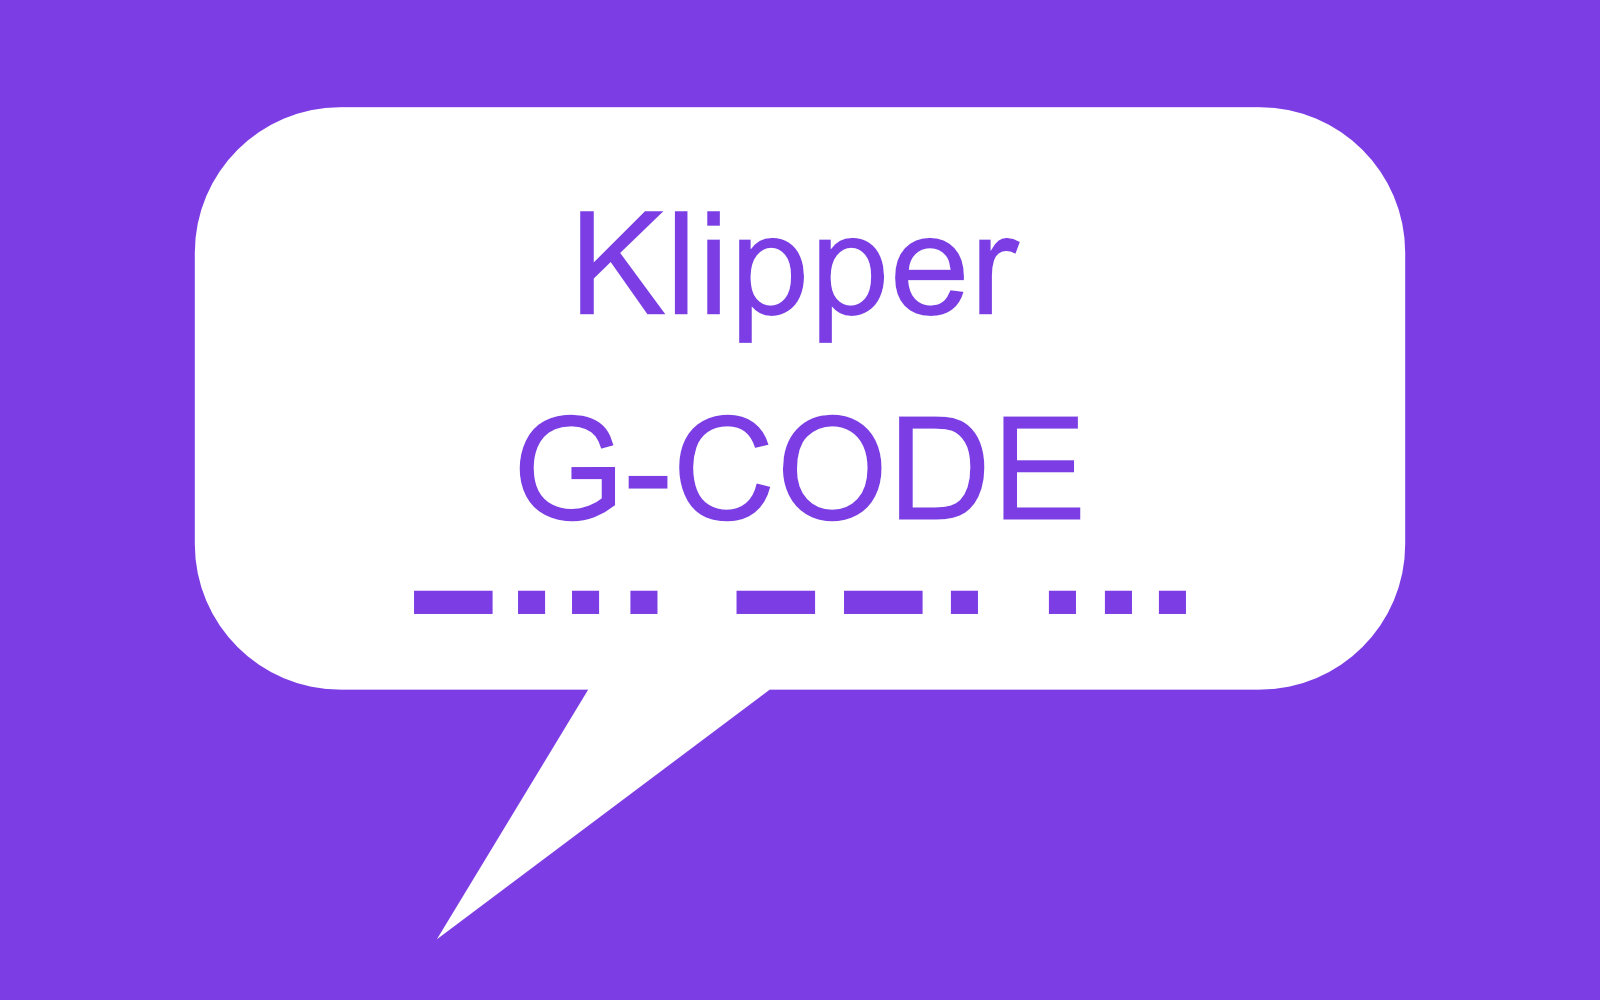 Klipper Supported G-Code